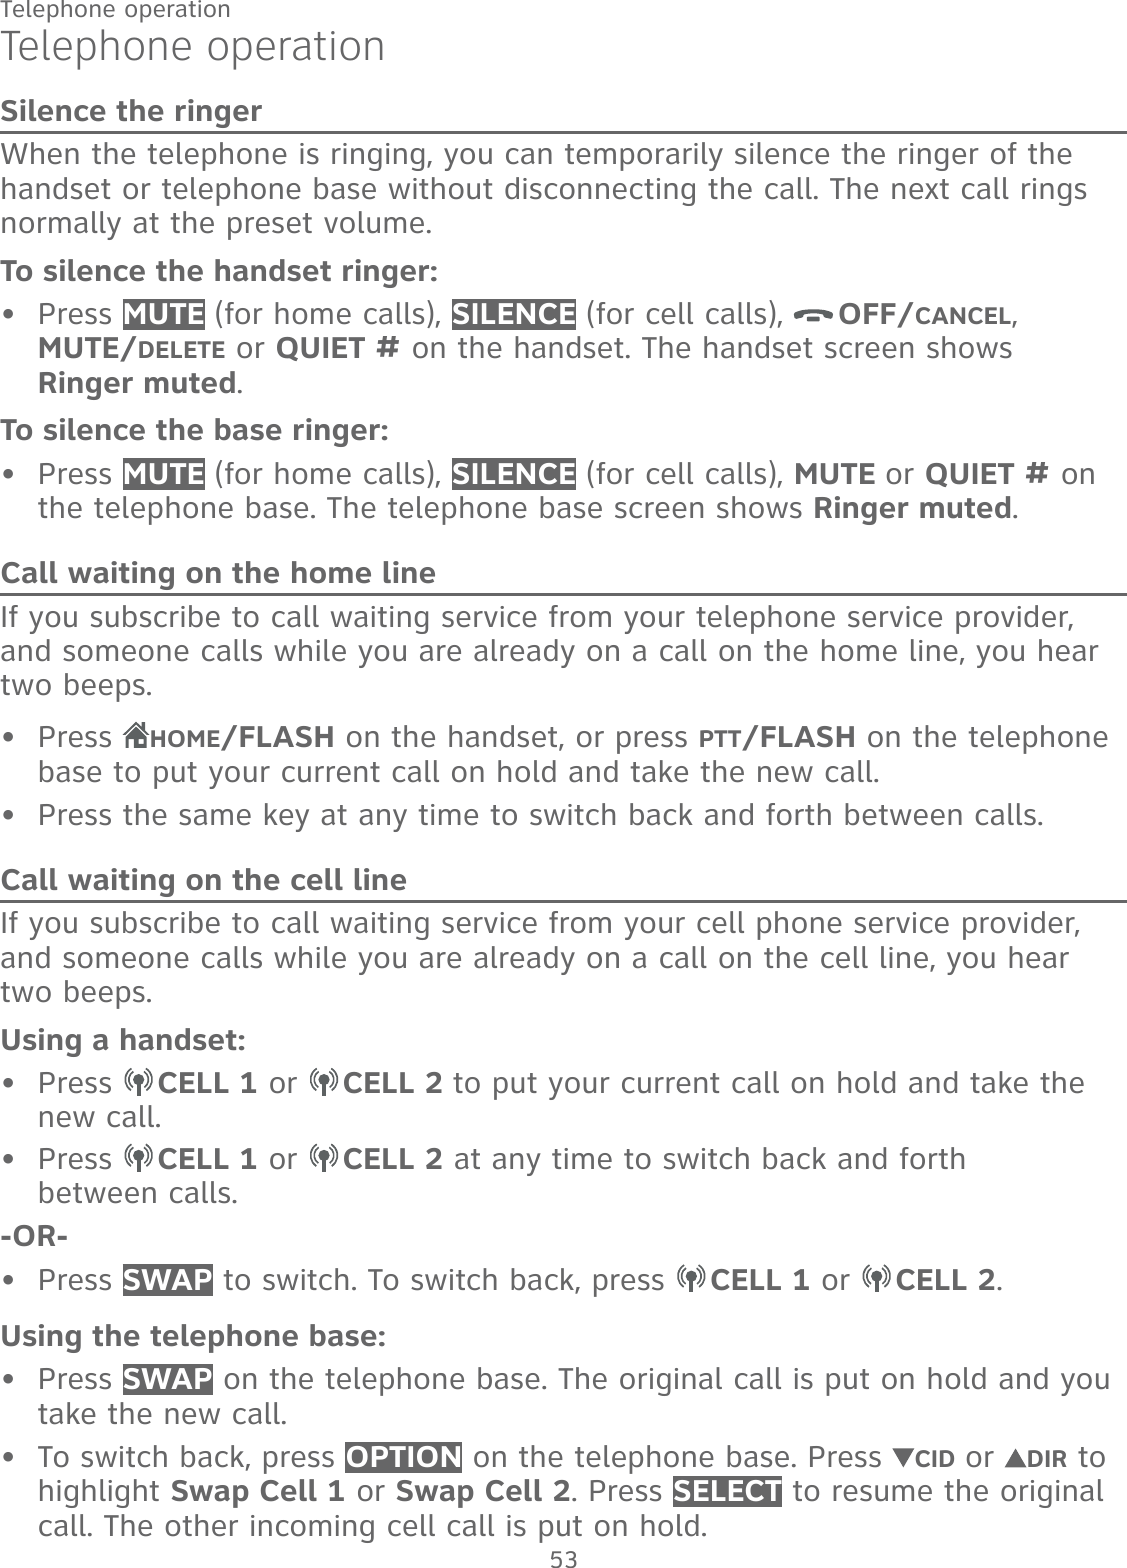 53Telephone operationTelephone operationSilence the ringerWhen the telephone is ringing, you can temporarily silence the ringer of the handset or telephone base without disconnecting the call. The next call rings normally at the preset volume.To silence the handset ringer:Press MUTE (for home calls), SILENCE (for cell calls),  OFF/CANCEL,  MUTE/DELETE or QUIET # on the handset. The handset screen shows  Ringer muted.To silence the base ringer:Press MUTE (for home calls), SILENCE (for cell calls), MUTE or QUIET # on the telephone base. The telephone base screen shows Ringer muted.Call waiting on the home lineIf you subscribe to call waiting service from your telephone service provider, and someone calls while you are already on a call on the home line, you hear  two beeps.Press  HOME/FLASH on the handset, or press PTT/FLASH on the telephone base to put your current call on hold and take the new call.Press the same key at any time to switch back and forth between calls.Call waiting on the cell lineIf you subscribe to call waiting service from your cell phone service provider, and someone calls while you are already on a call on the cell line, you hear  two beeps.Using a handset:Press  CELL 1 or  CELL 2 to put your current call on hold and take the new call.Press  CELL 1 or  CELL 2 at any time to switch back and forth  between calls.-OR-Press SWAP to switch. To switch back, press  CELL 1 or  CELL 2.Using the telephone base:Press SWAP on the telephone base. The original call is put on hold and you take the new call.To switch back, press OPTION on the telephone base. Press  CID or  DIR to highlight Swap Cell 1 or Swap Cell 2. Press SELECT to resume the original call. The other incoming cell call is put on hold.•••••••••